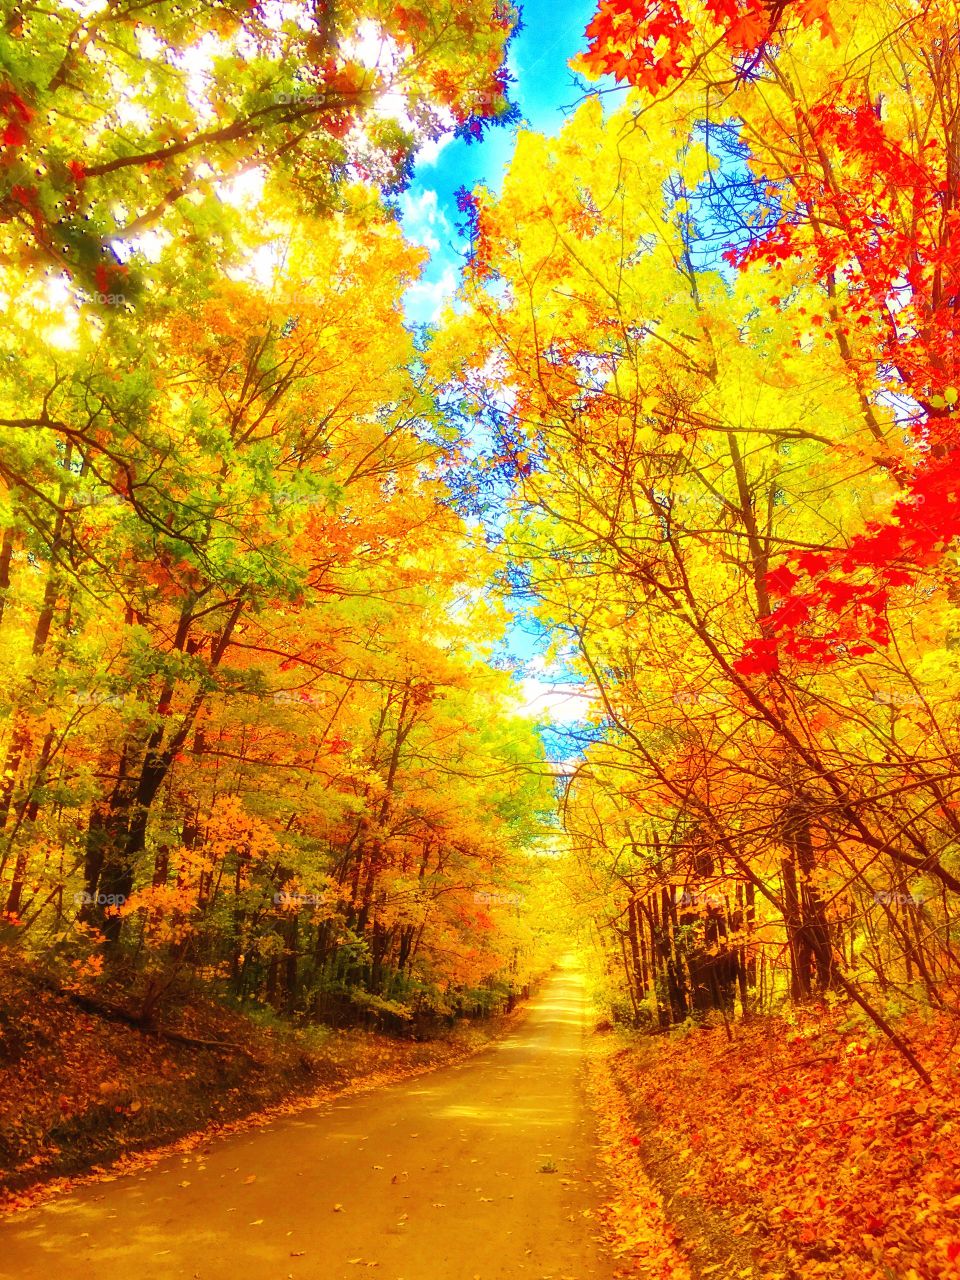 The Golden road of autumn 